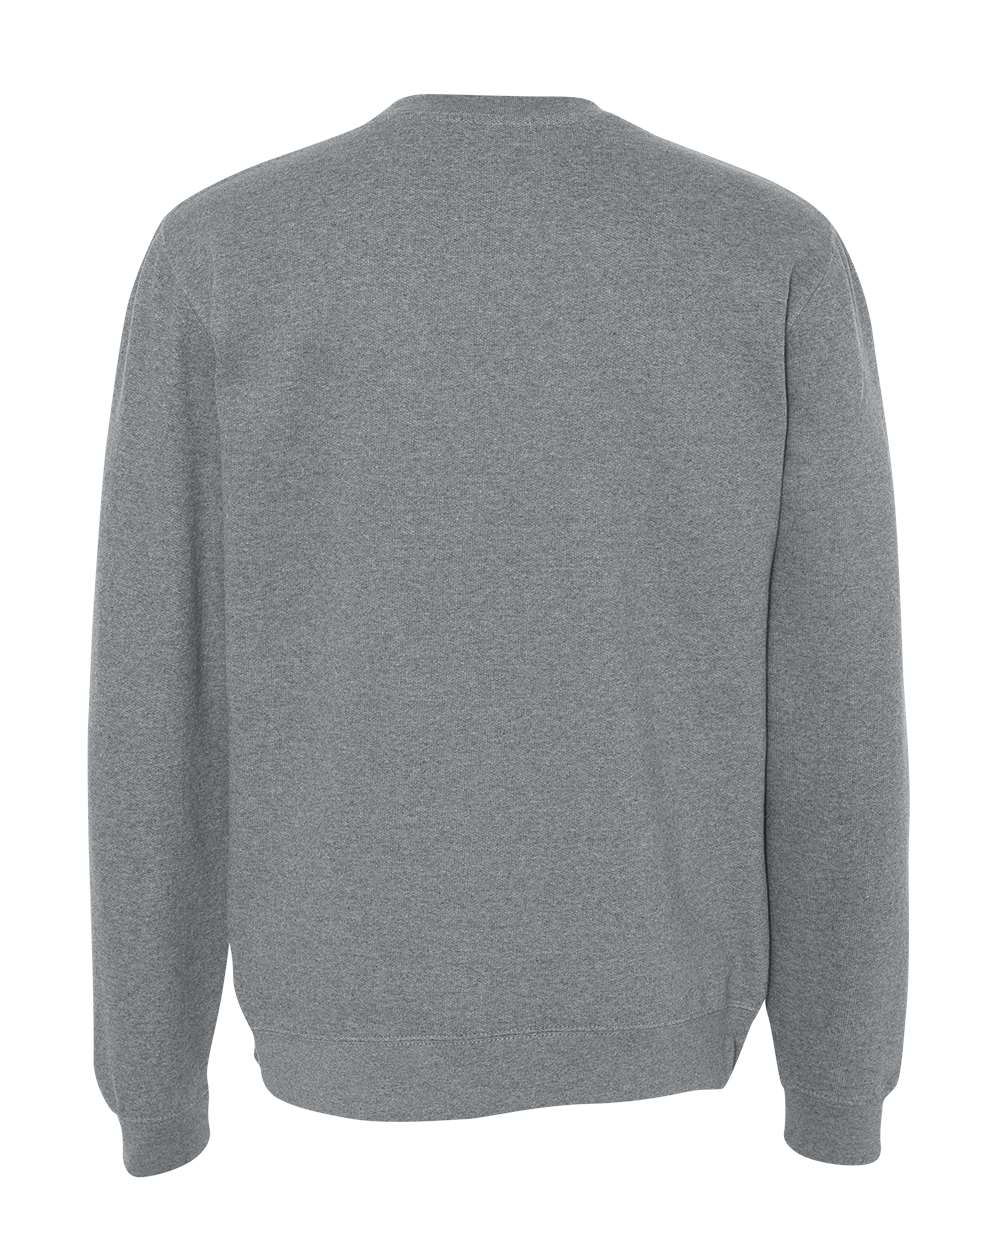 Independent Trading Co. Midweight Sweatshirt SS3000 #color_Gunmetal Heather